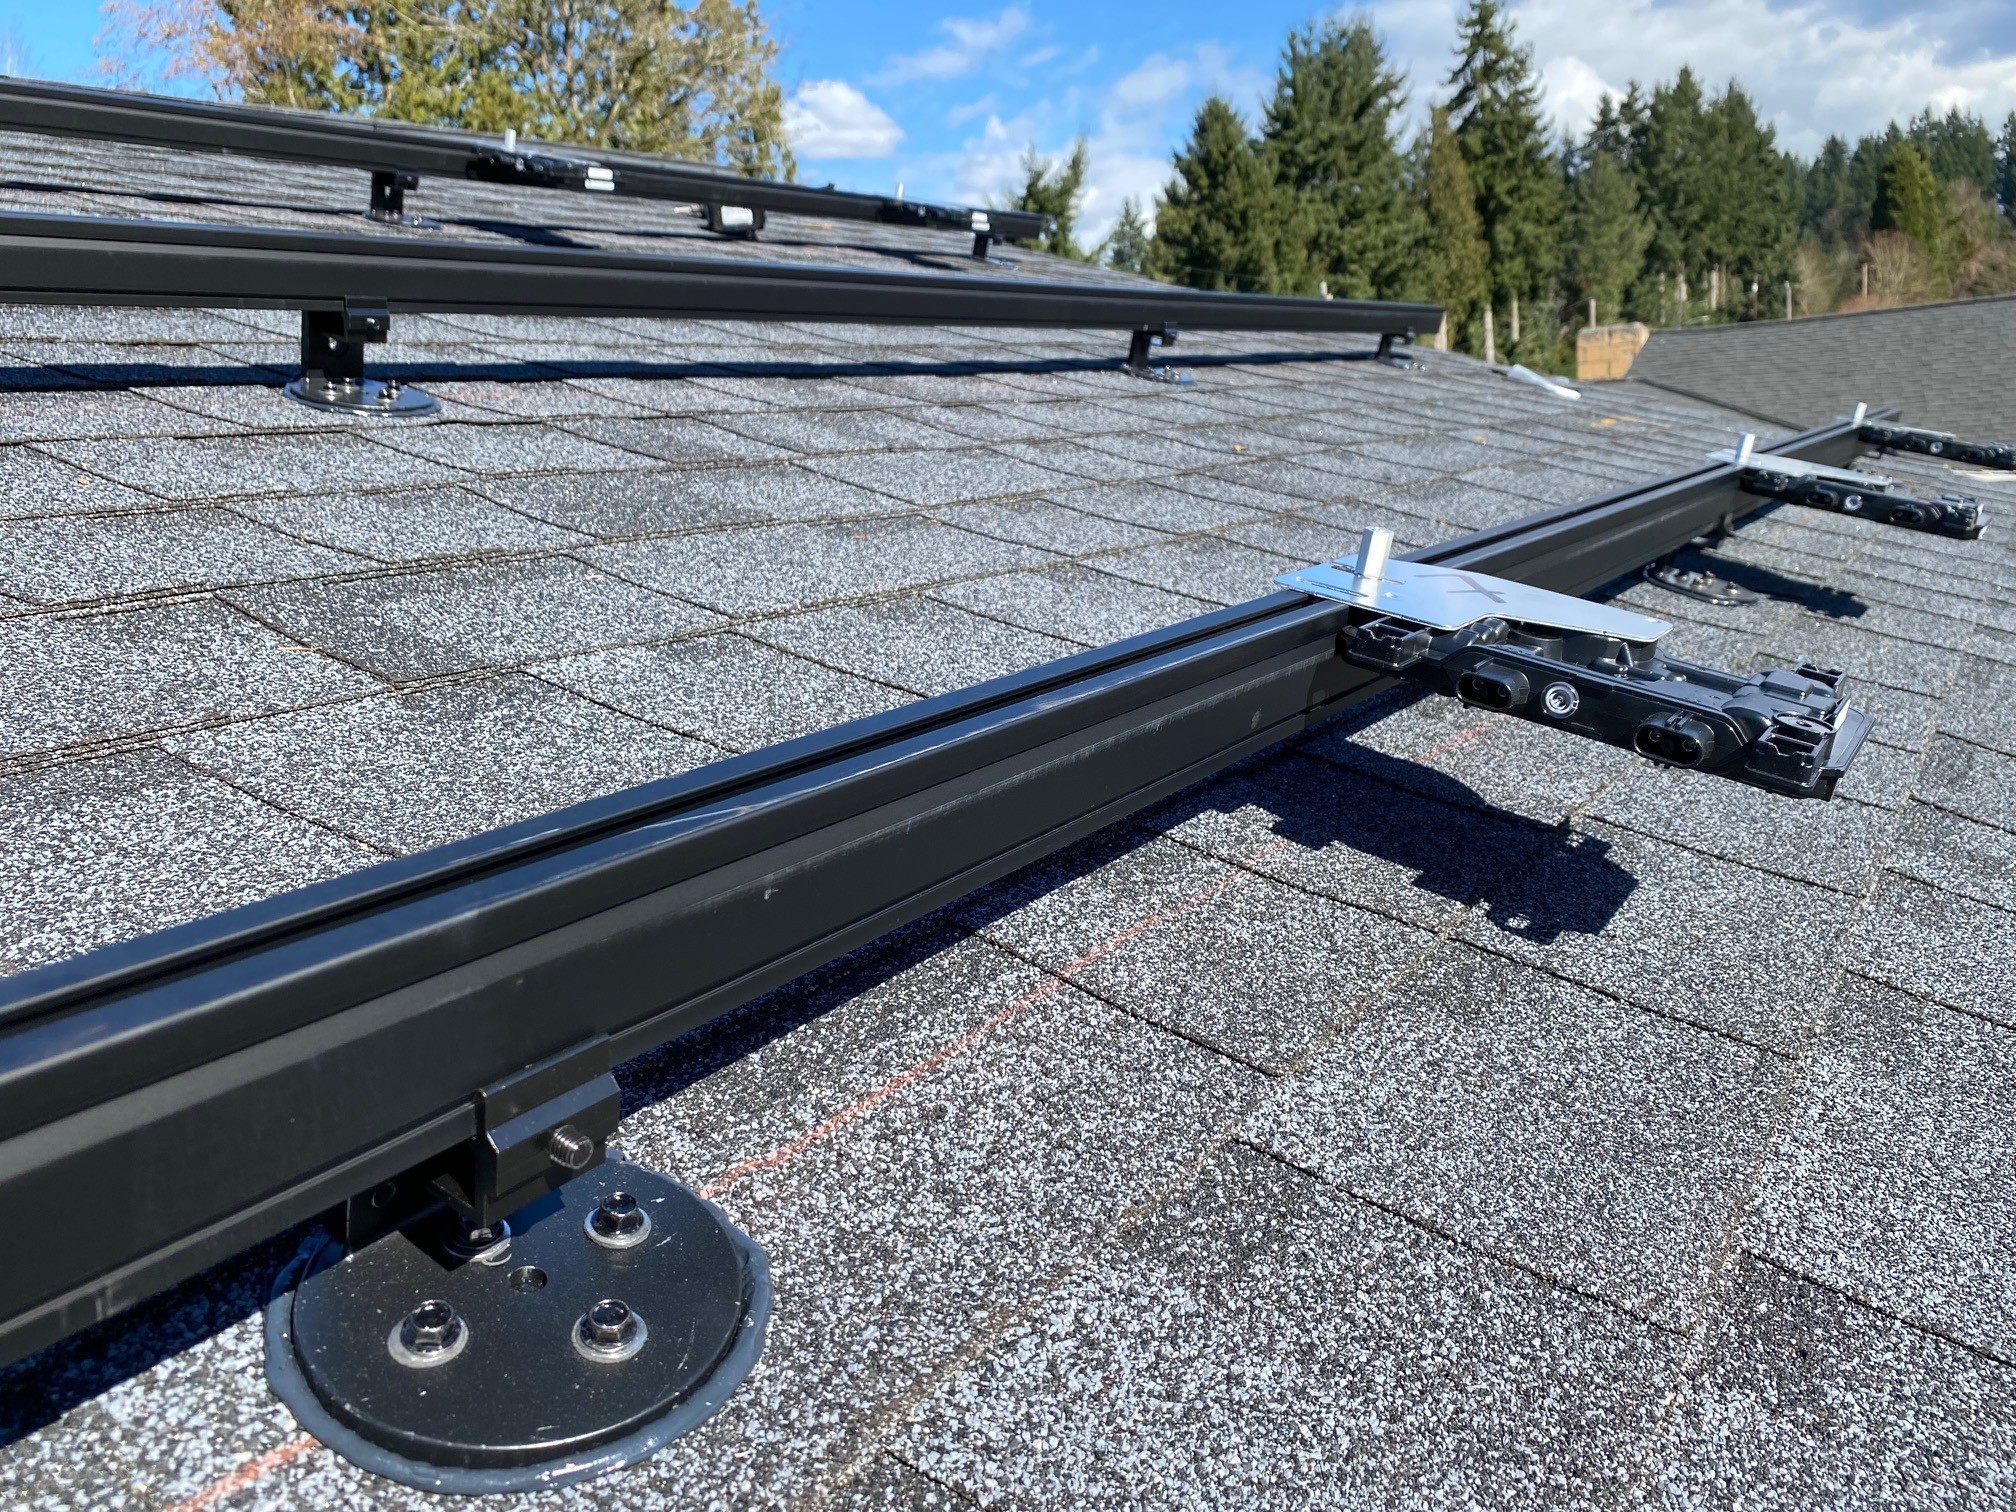 Why Deck Attachments are trending in residential rooftop solar mounting